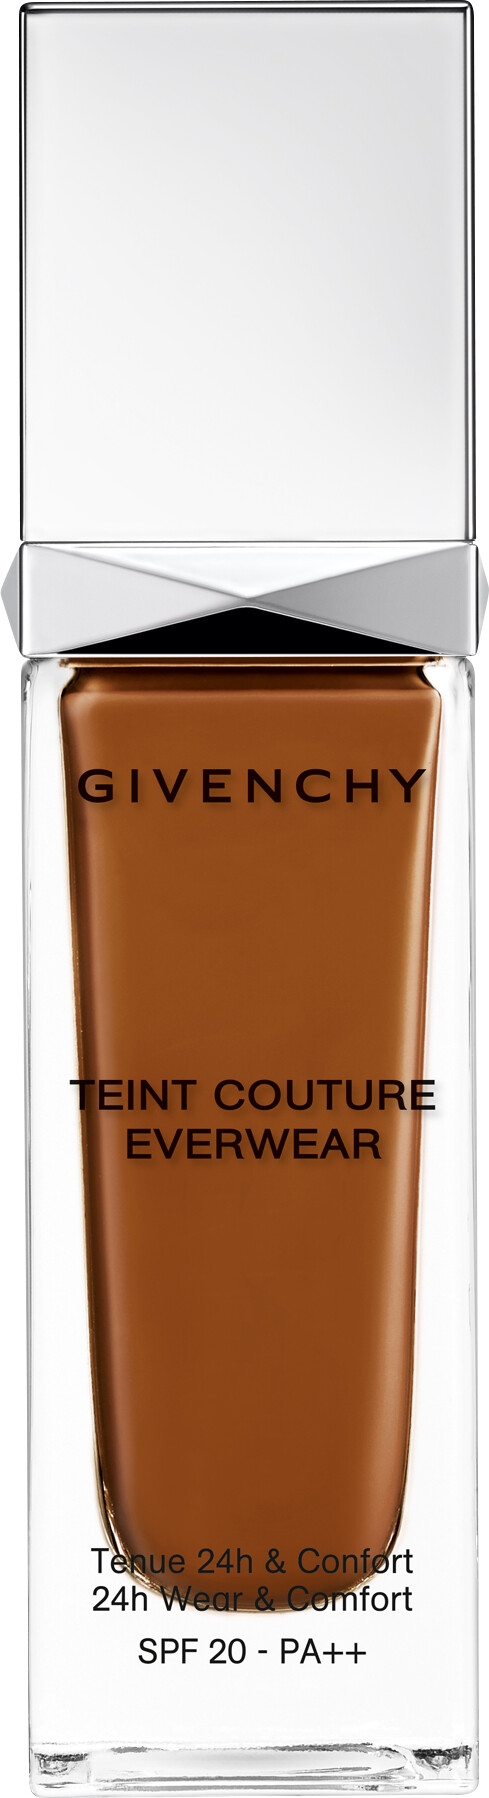 GIVENCHY Teint Couture Everwear 24h Wear & Comfort Foundation SPF20 30ml P400